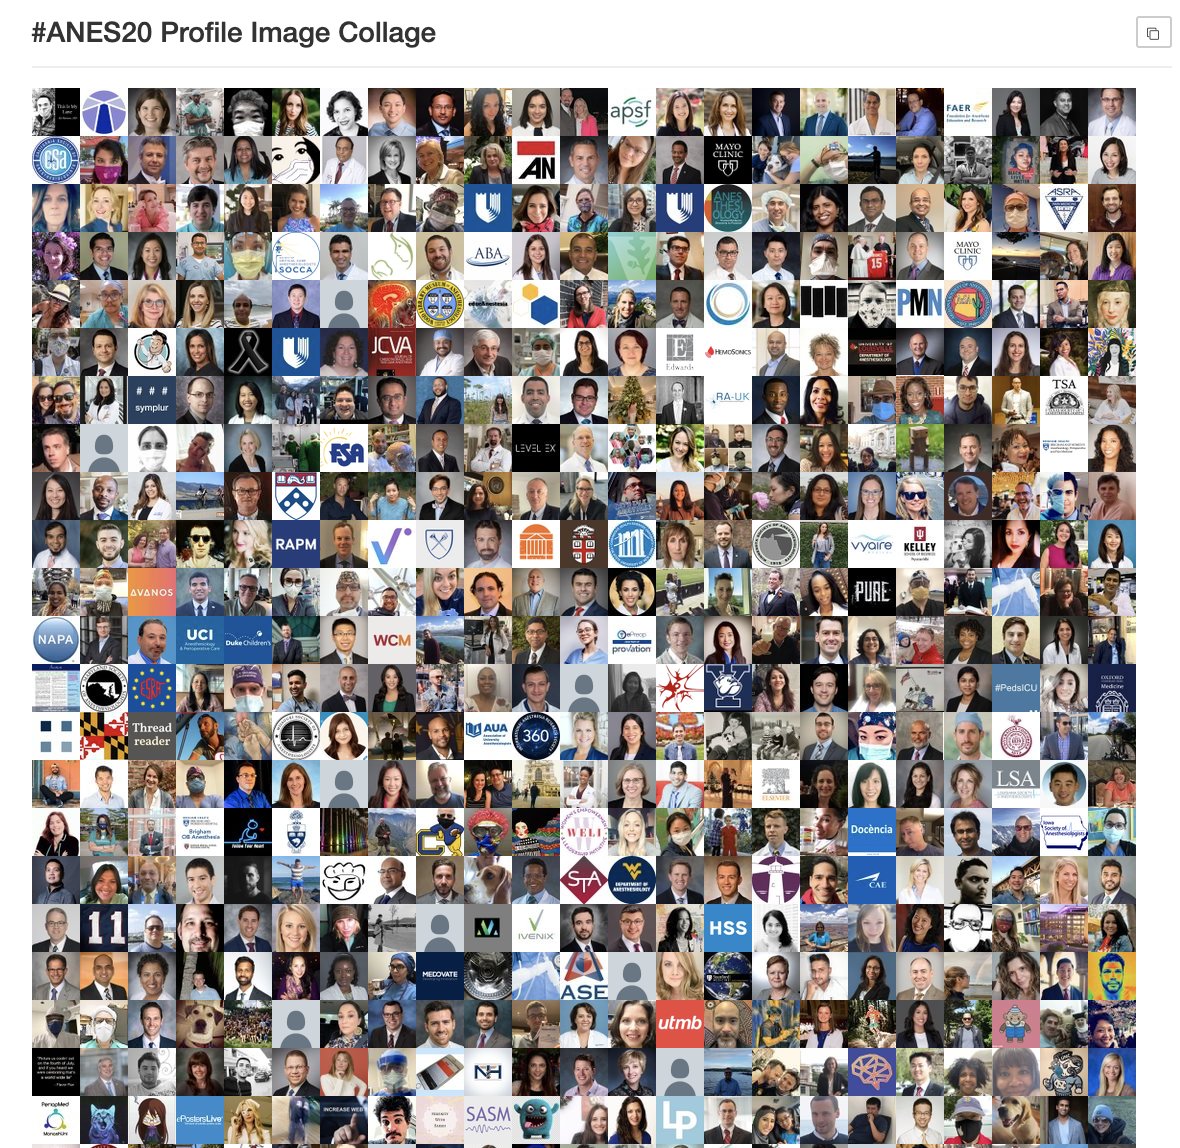 Now you're really going to have to zoom in - I think I have everyone in this collage! If you don't see yourself or a colleague you know was tweeting, reply here so I can check on it. :) Of course, be sure your bio has a photo uploaded first!  #ANES20